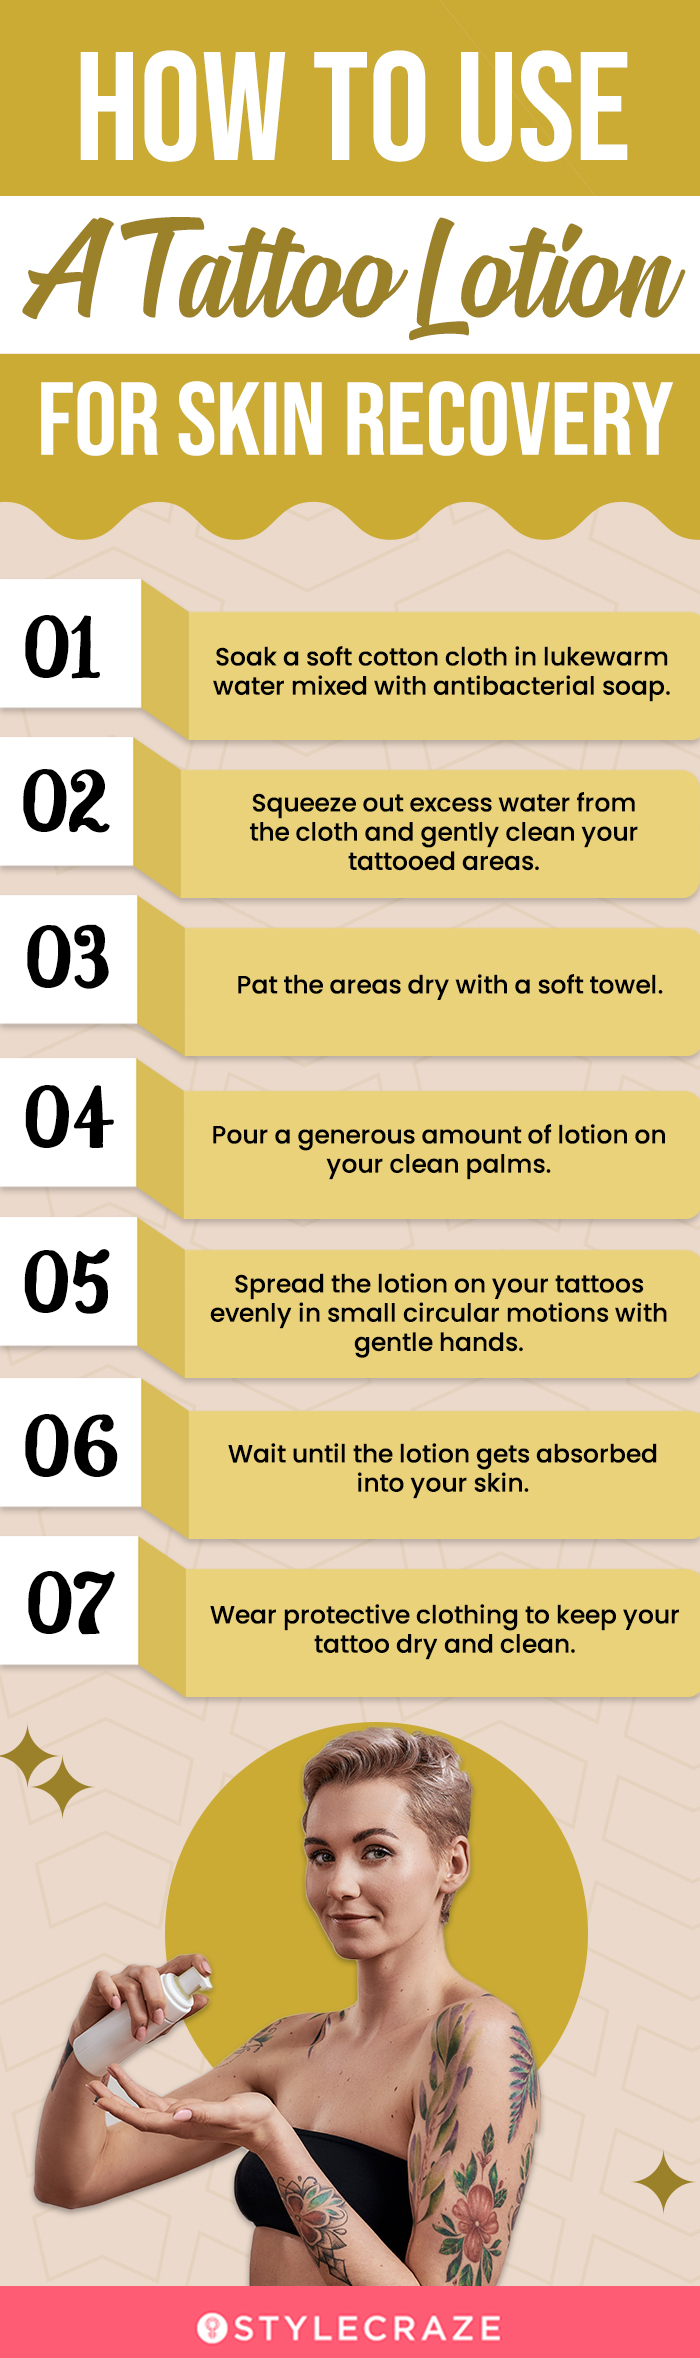 How To Use A Tattoo Lotion For Skin Recovery (infographic)